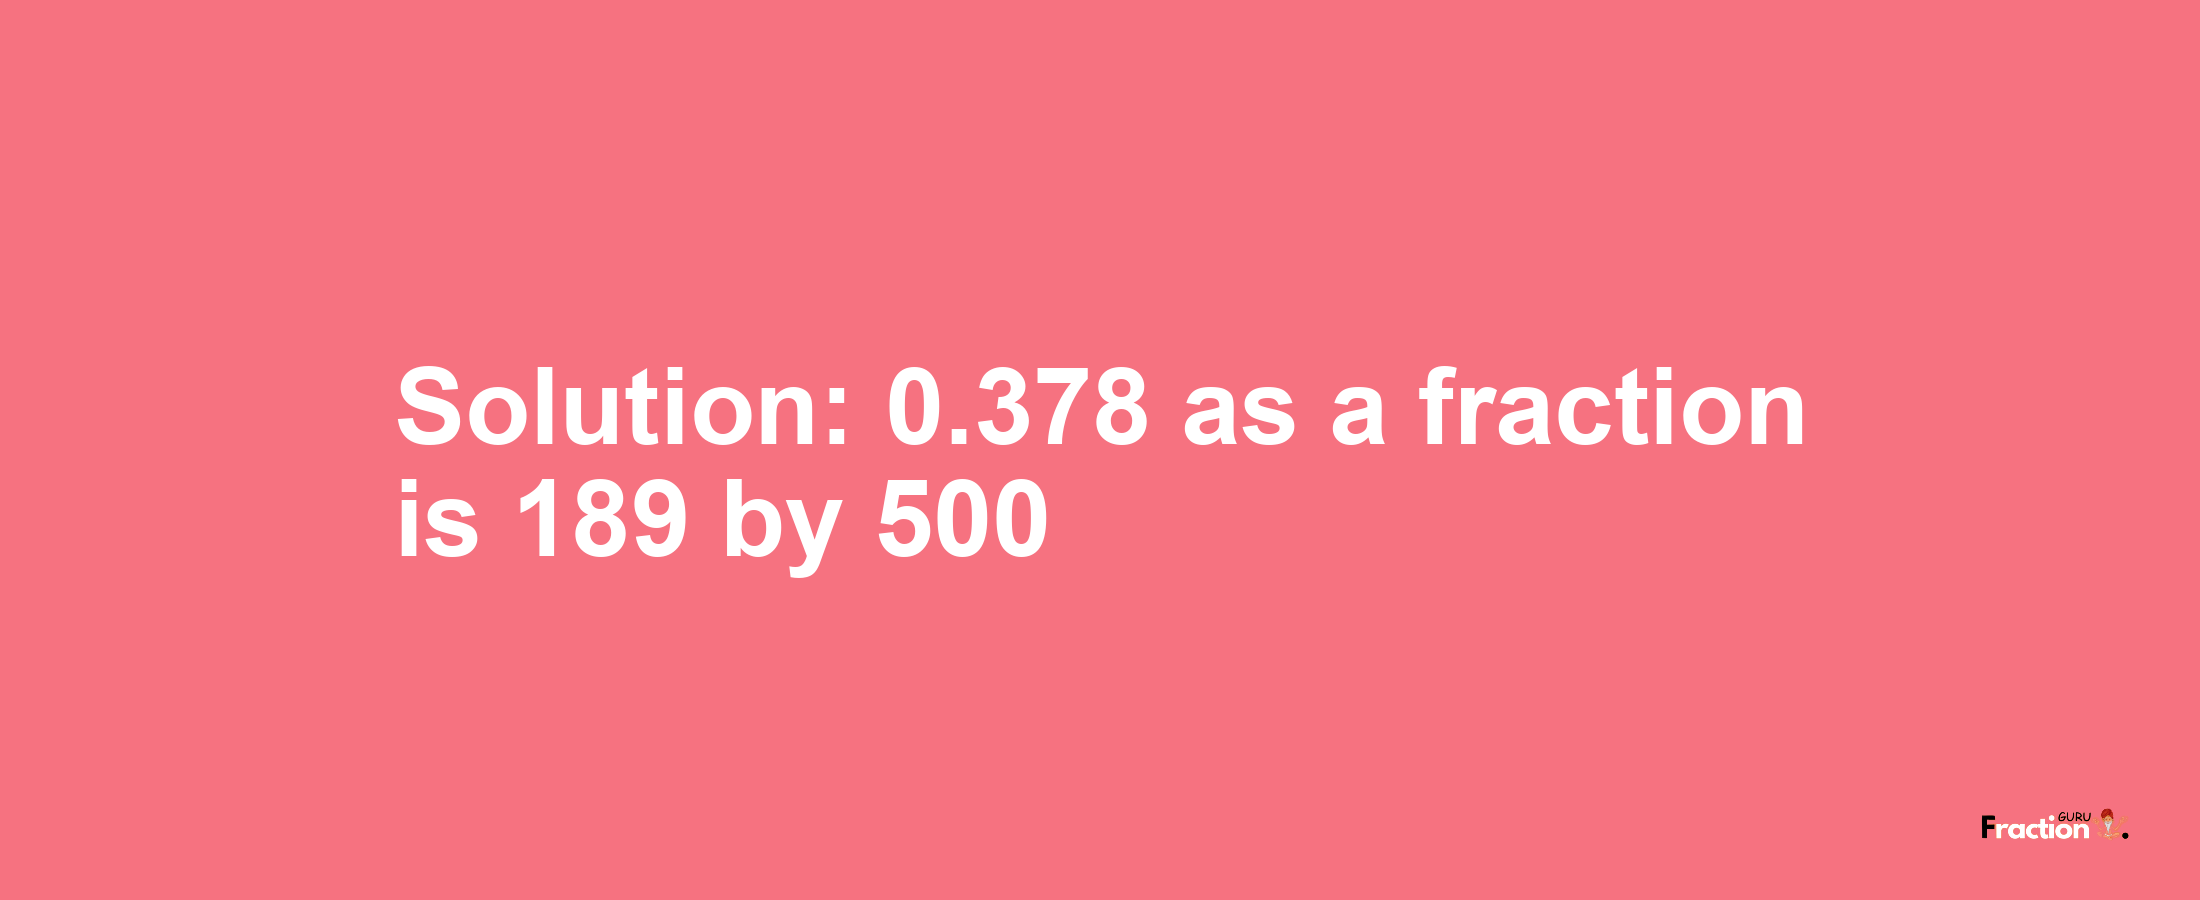 Solution:0.378 as a fraction is 189/500